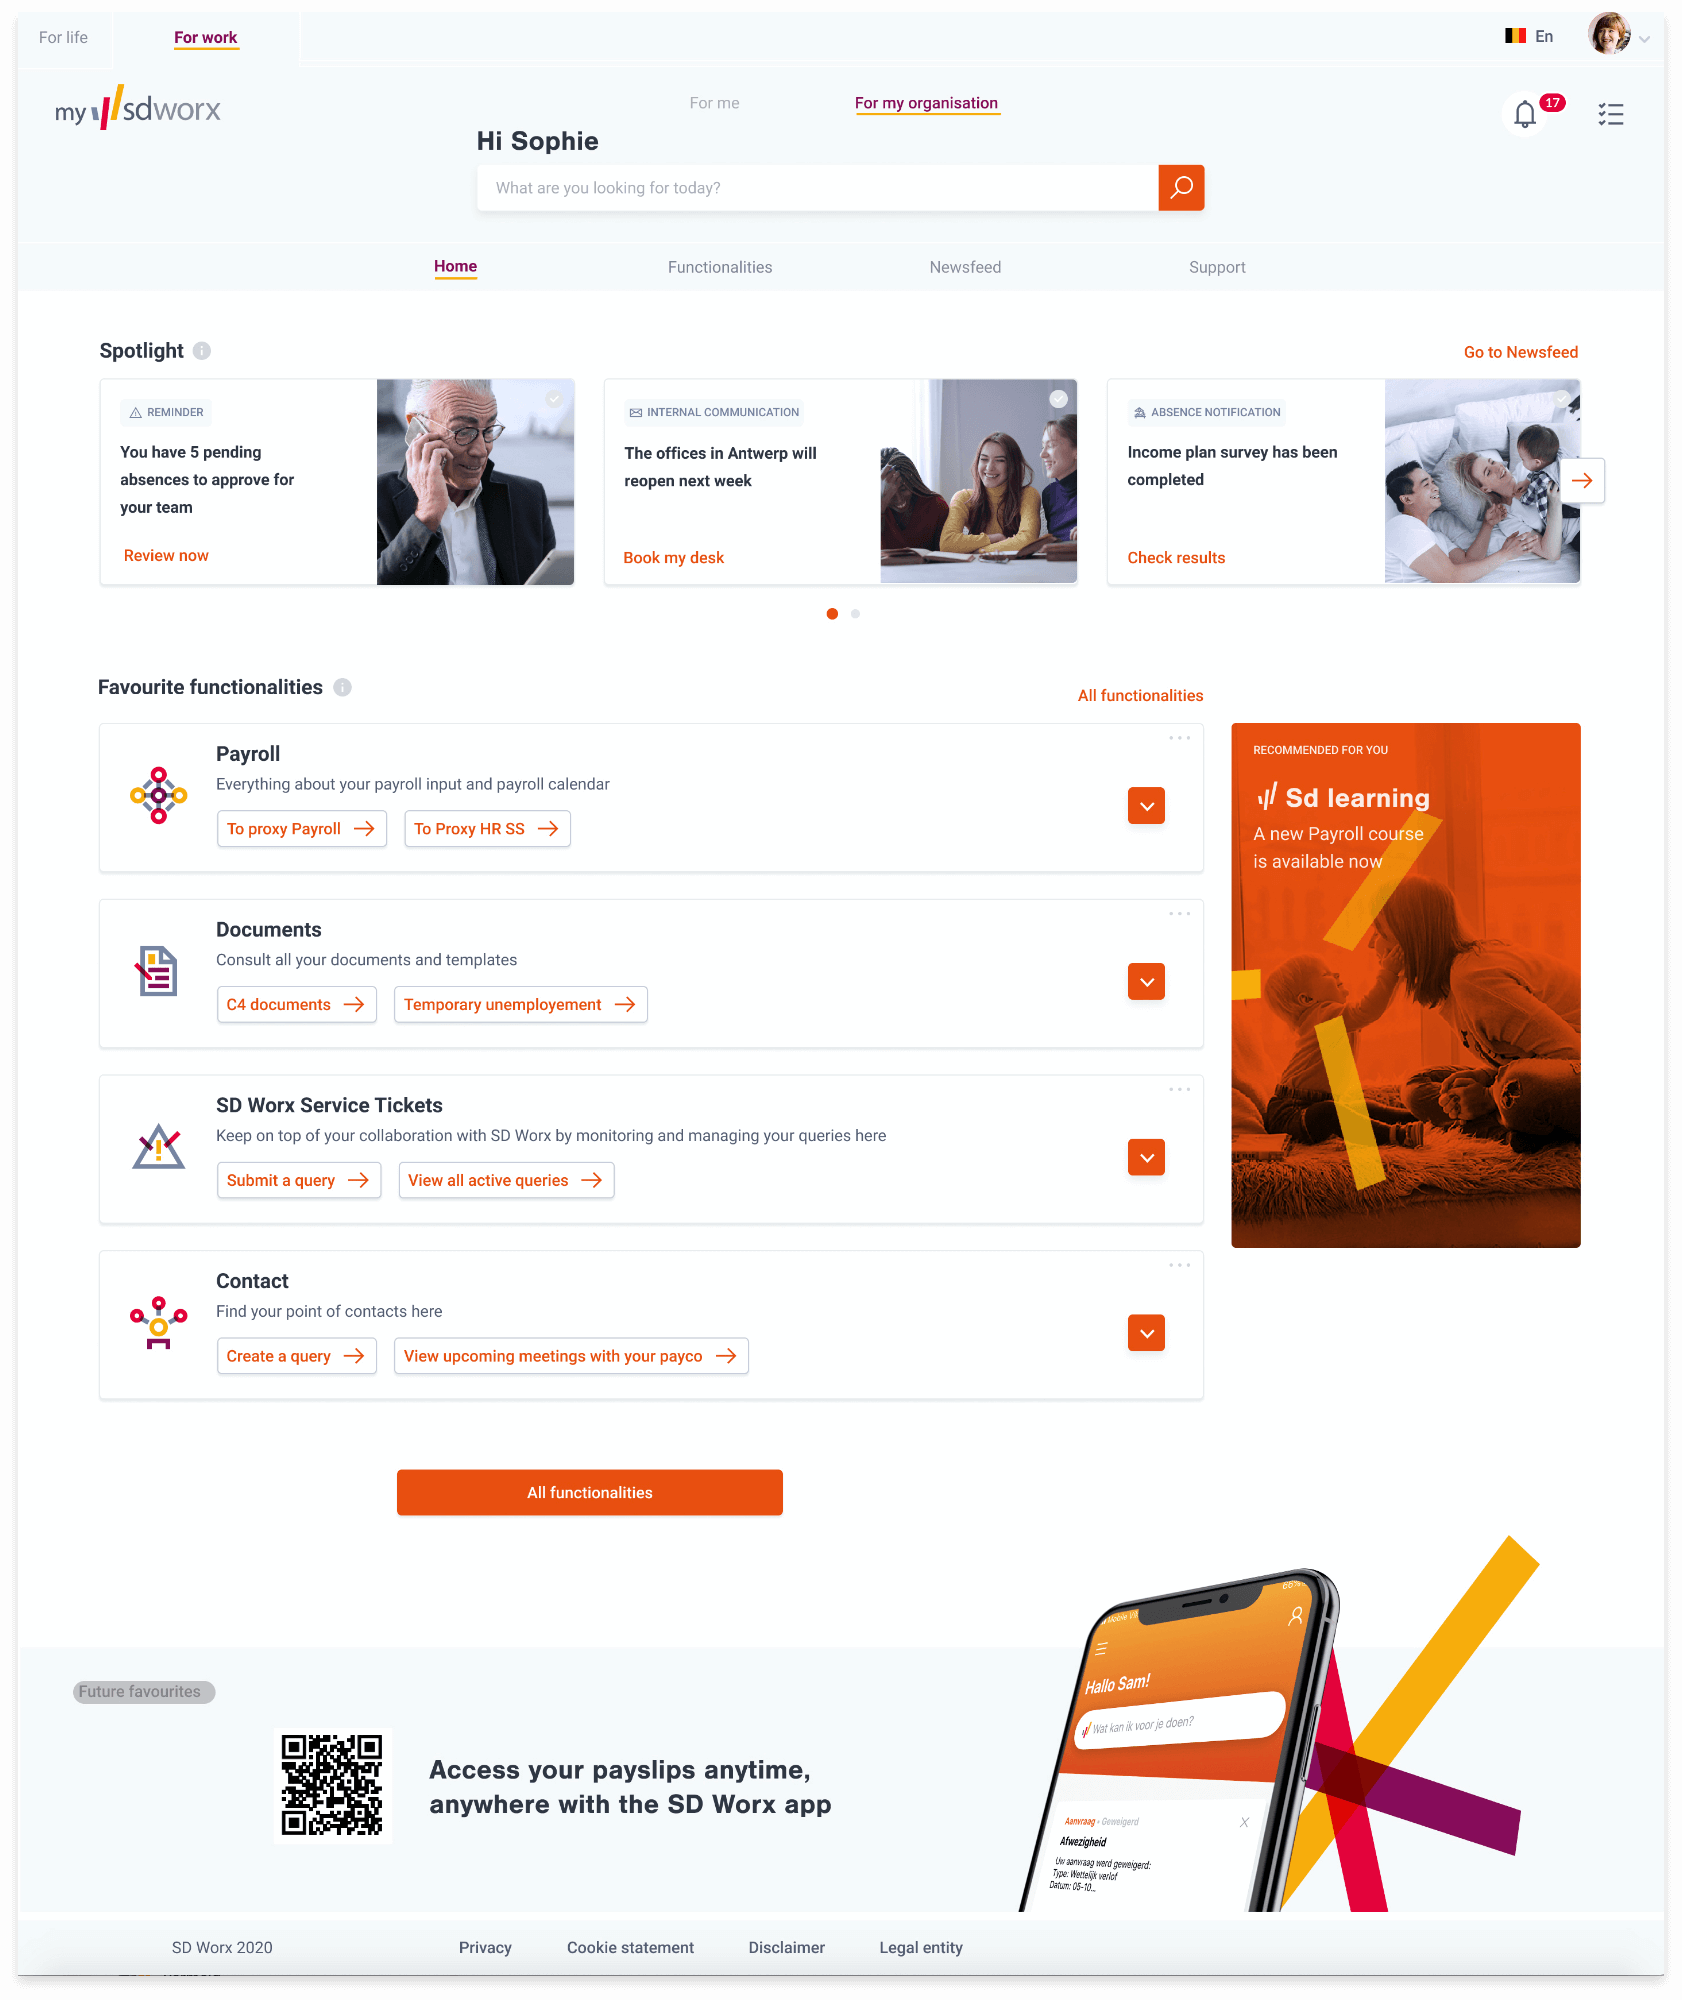 Interface of mysdworx for employers